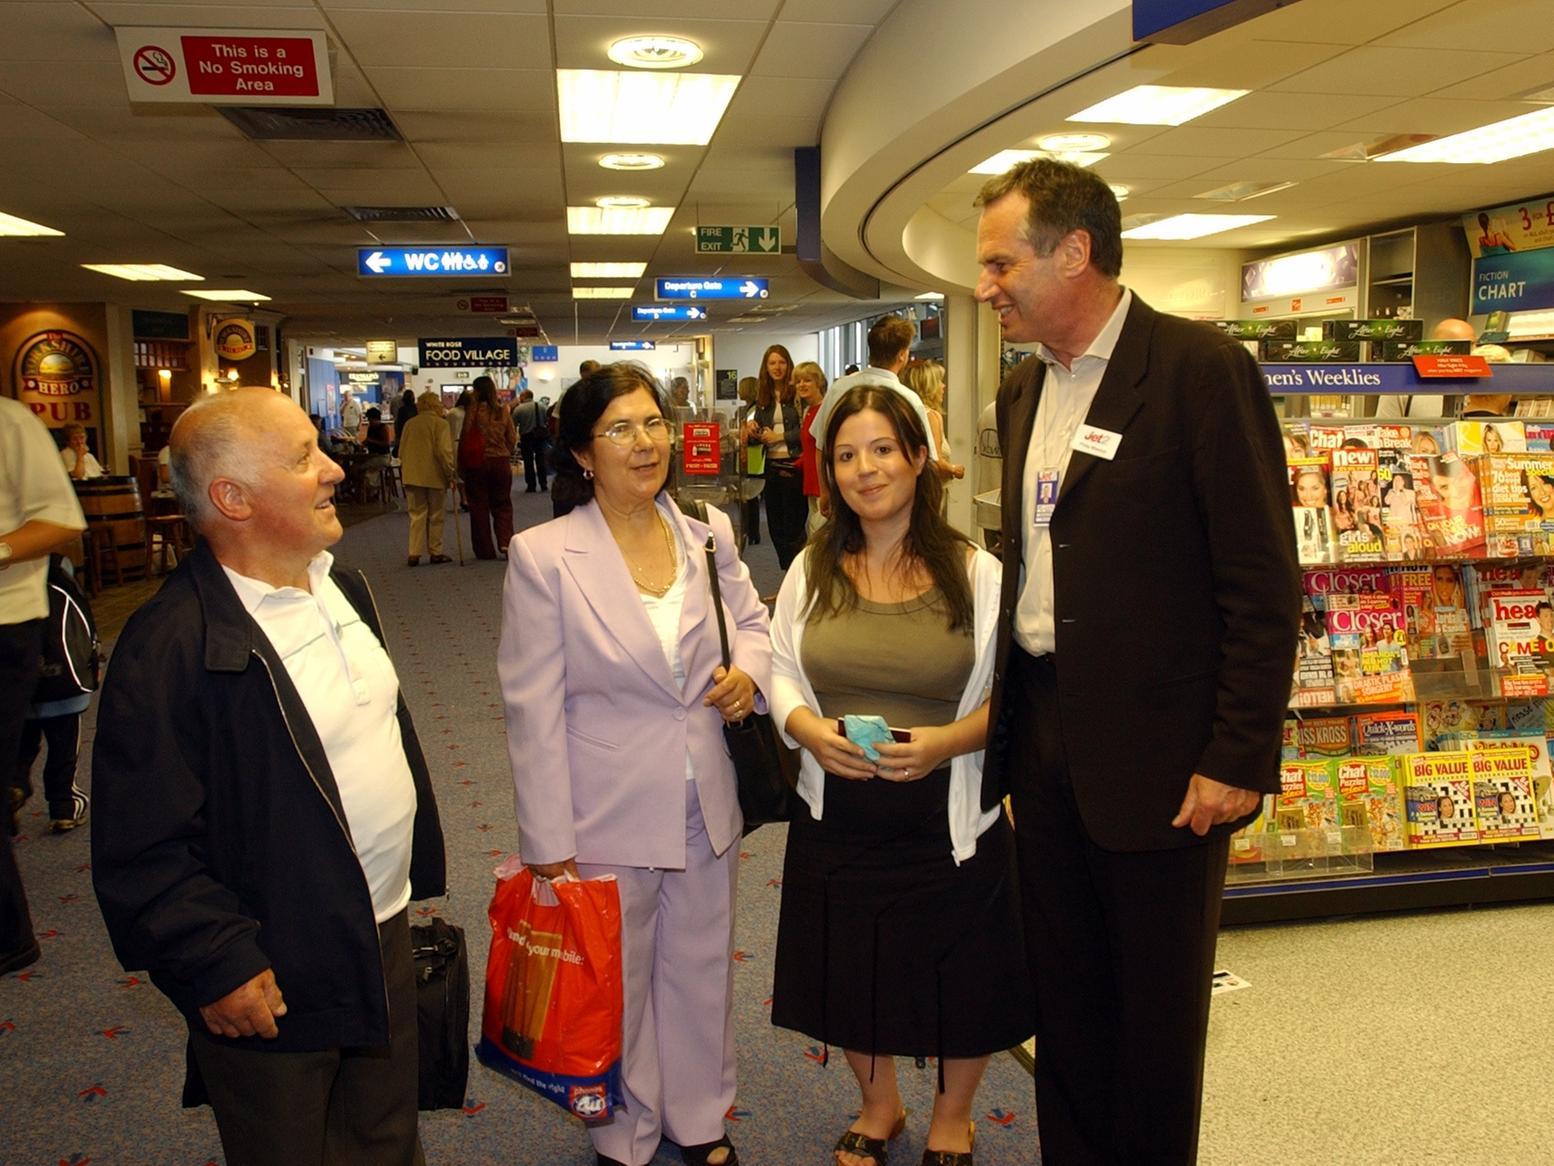 Chief executive of Jet2 Philip Meeson chats with passengers.